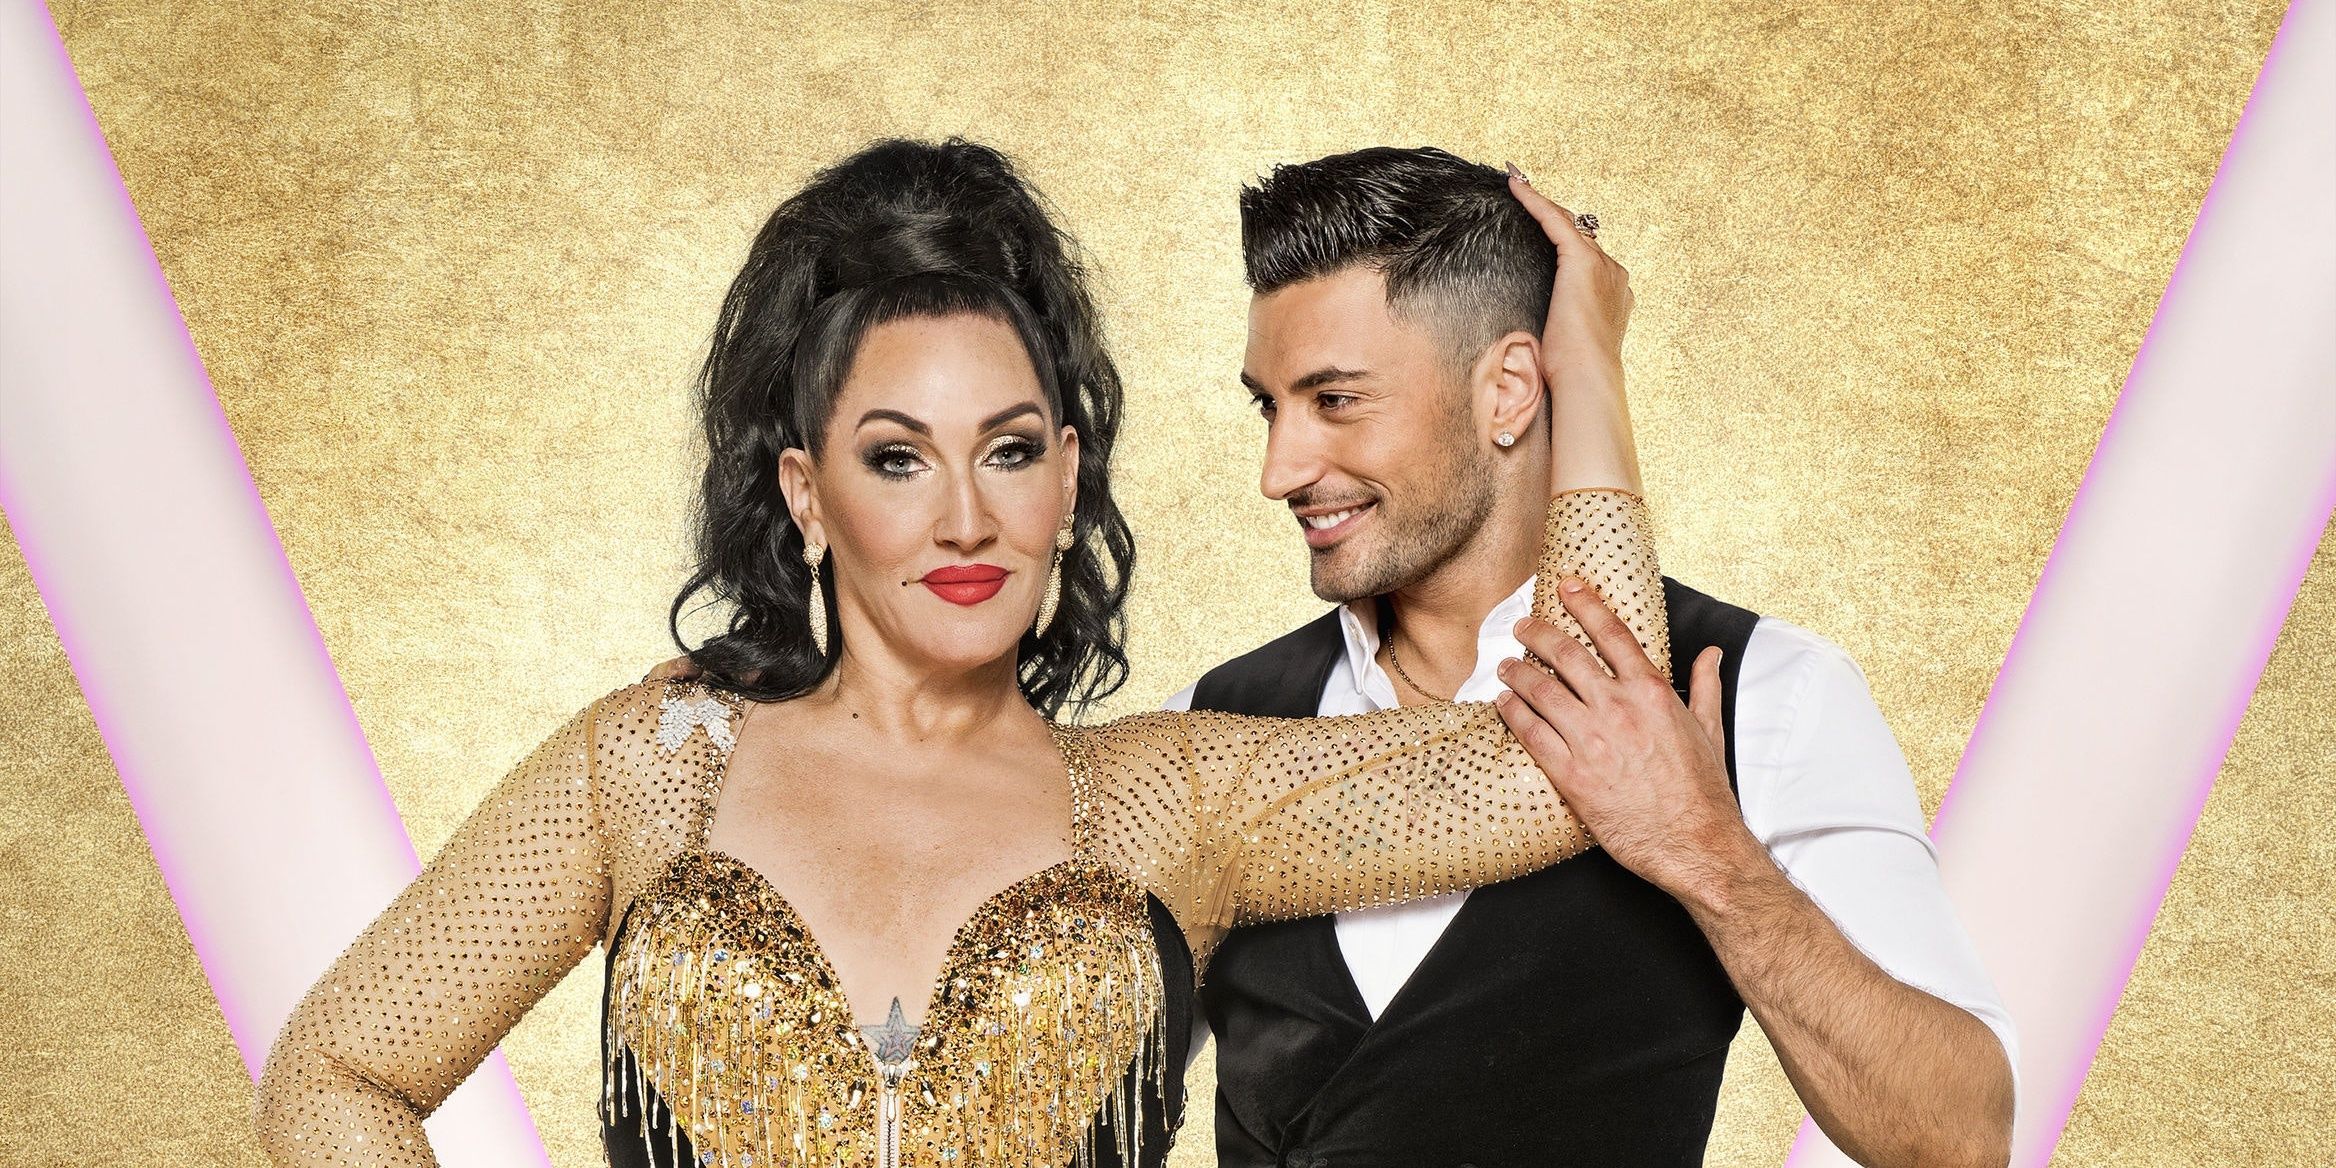 Michelle Visage on Strictly Come Dancing